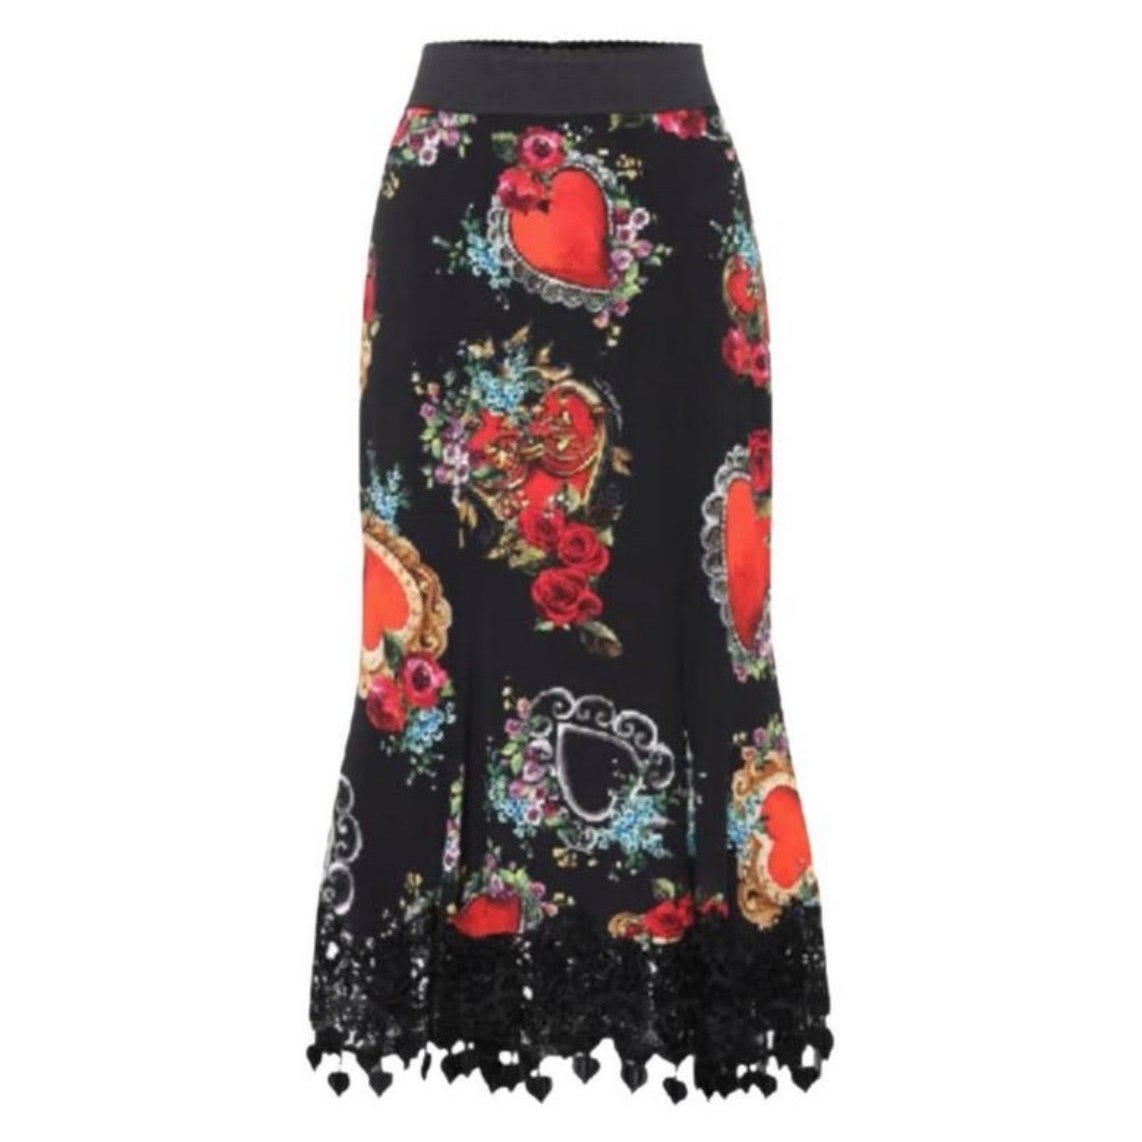 Dolce & Gabbana Silk midi skirt
With heart and Rose print in black